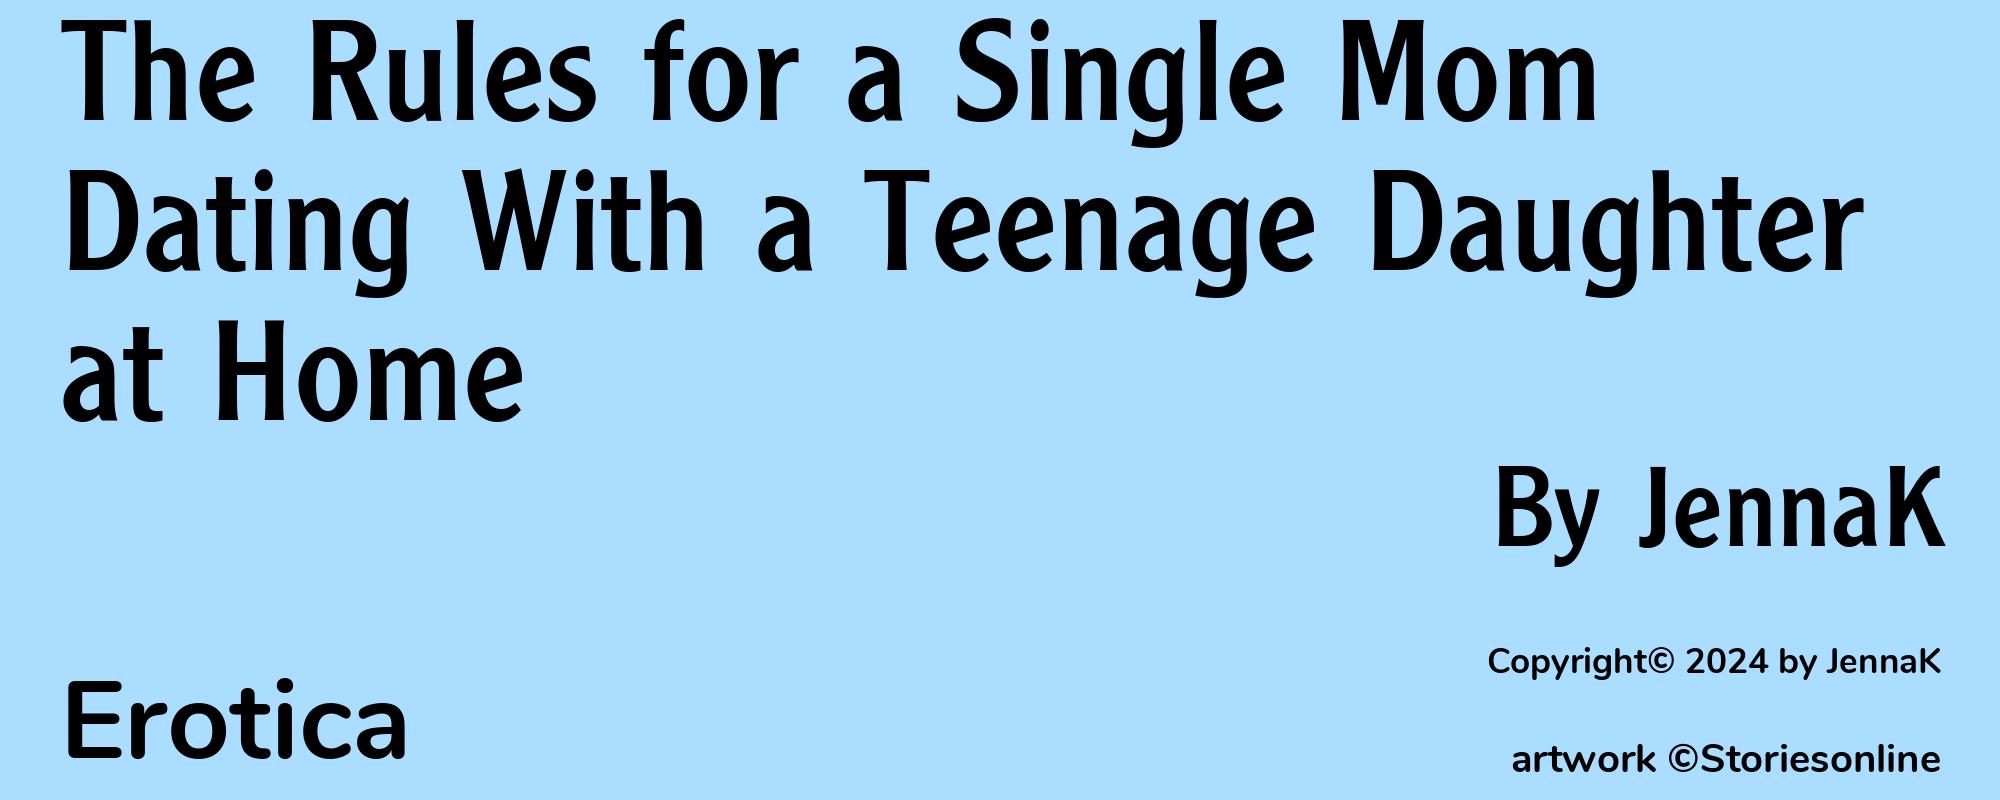 The Rules for a Single Mom Dating With a Teenage Daughter at Home - Cover